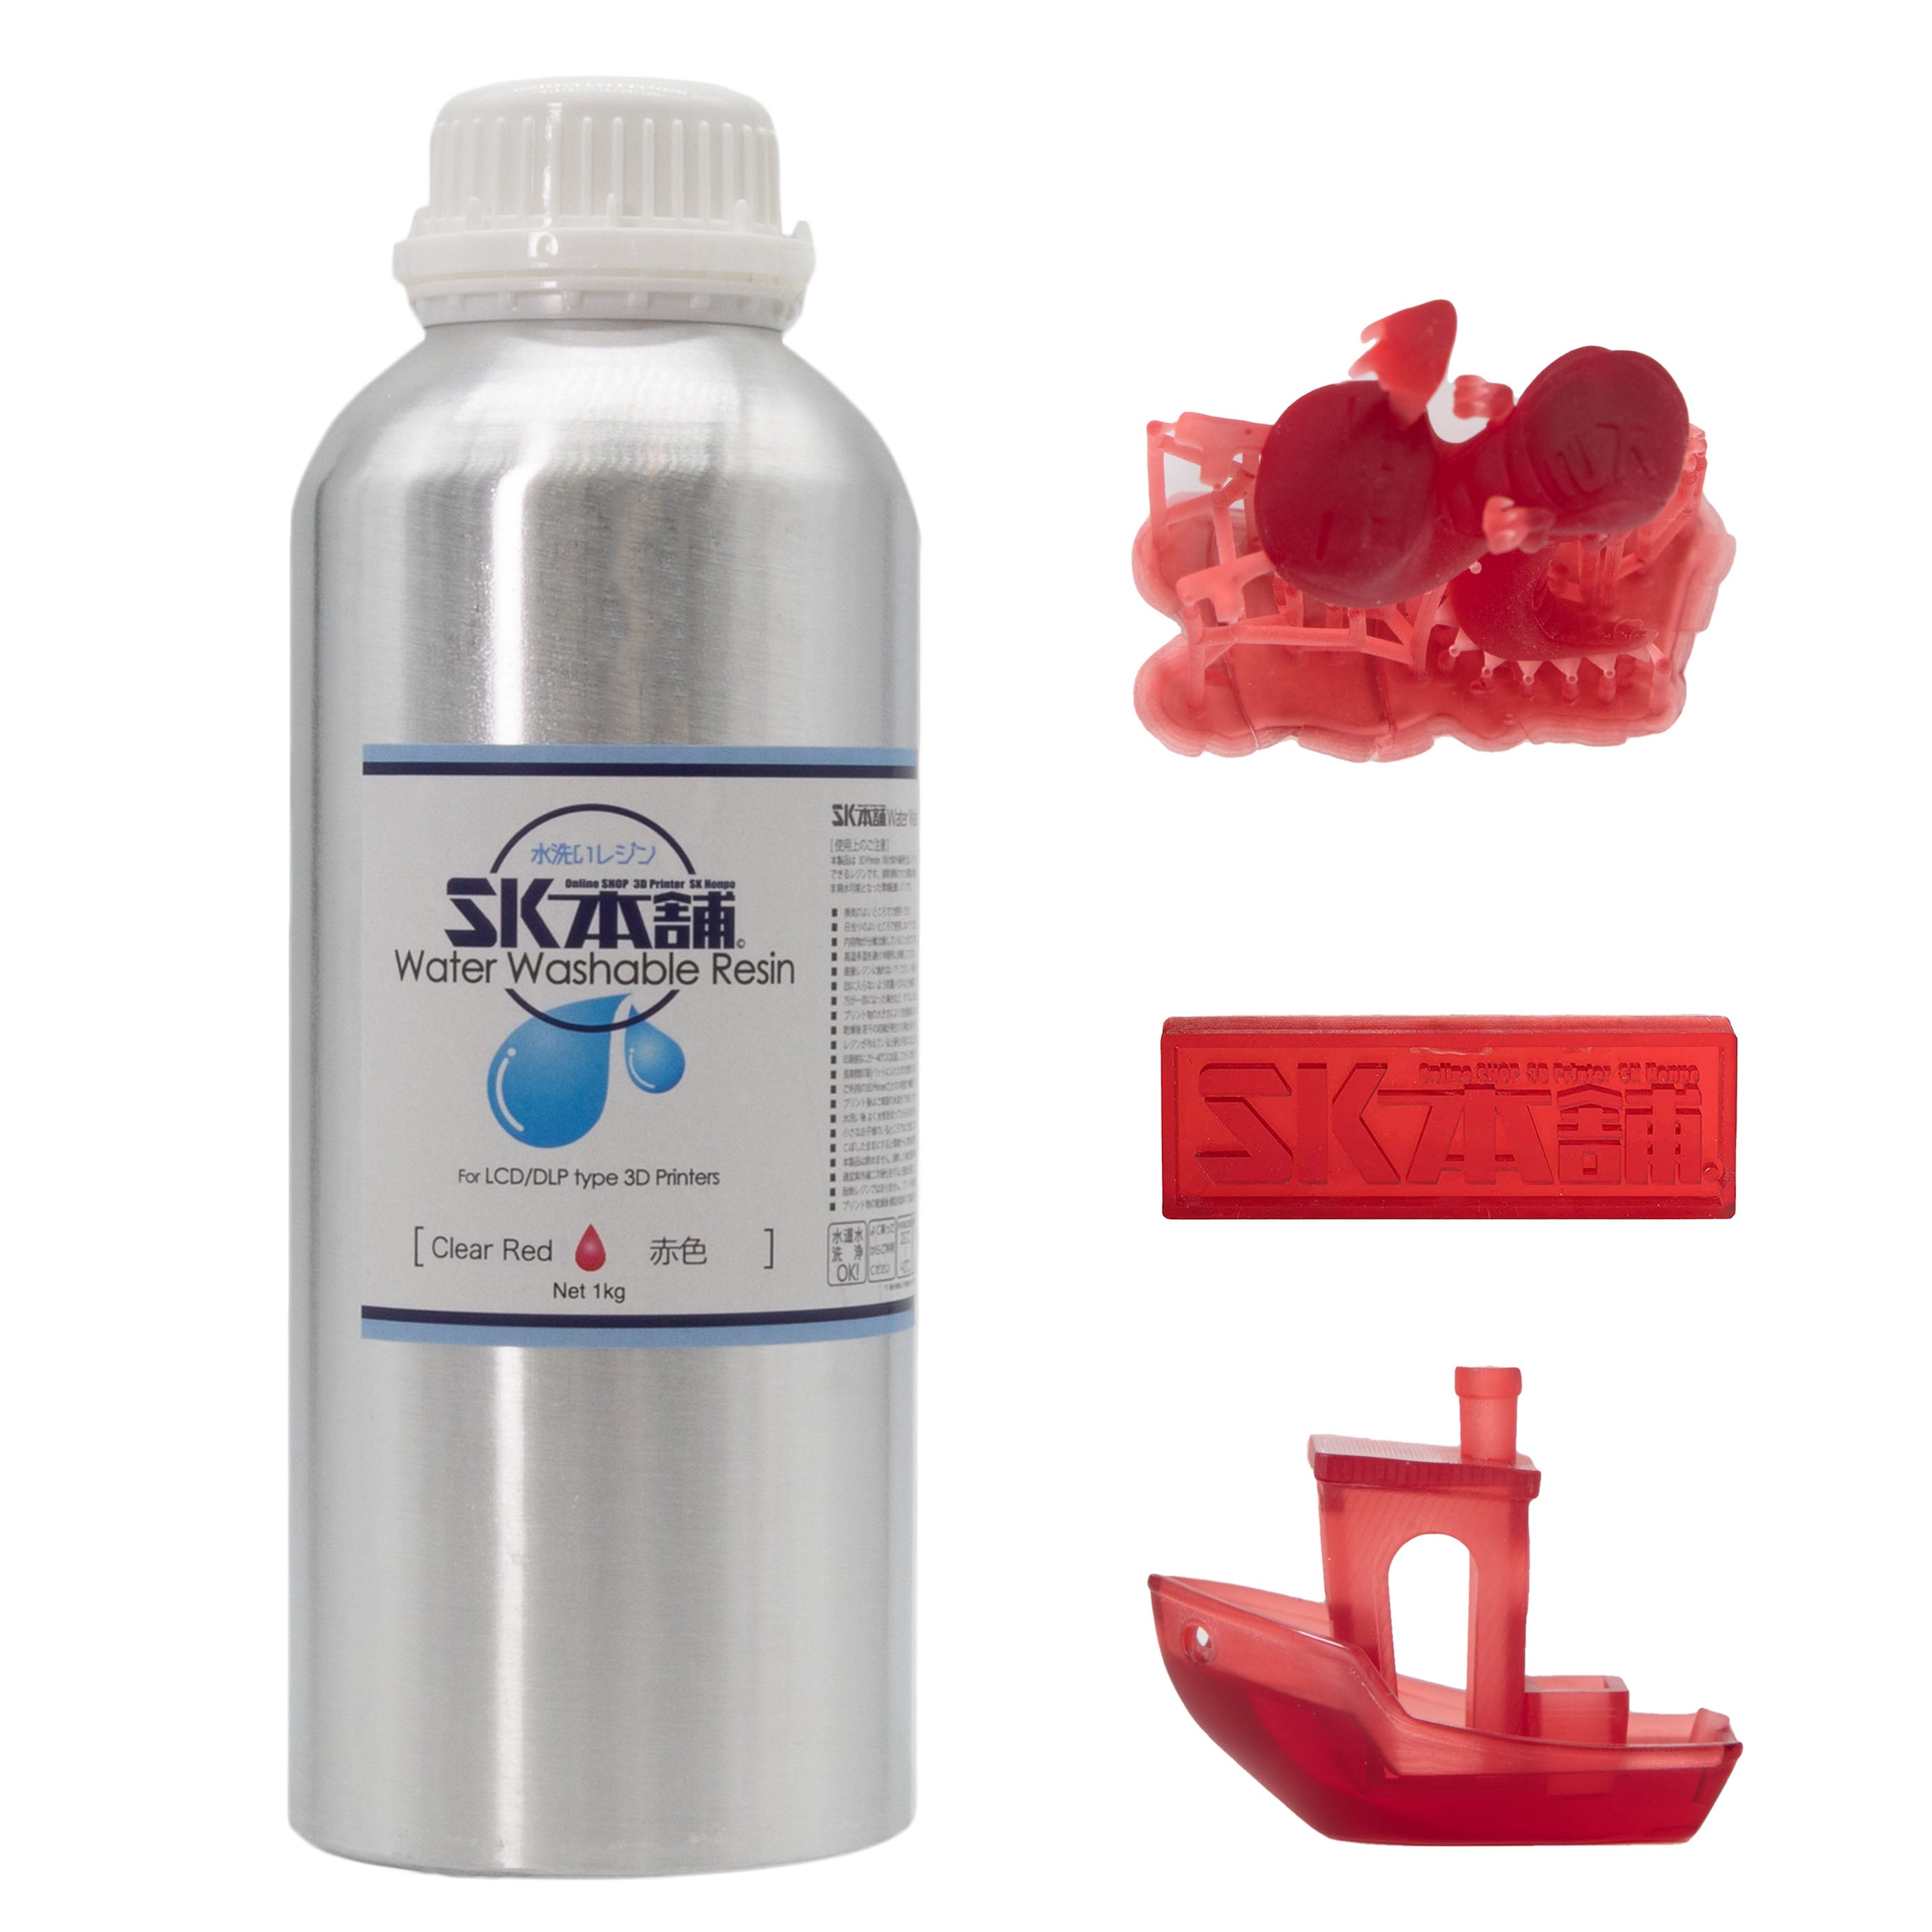 SK Waterwashable Resin clear red_1000g